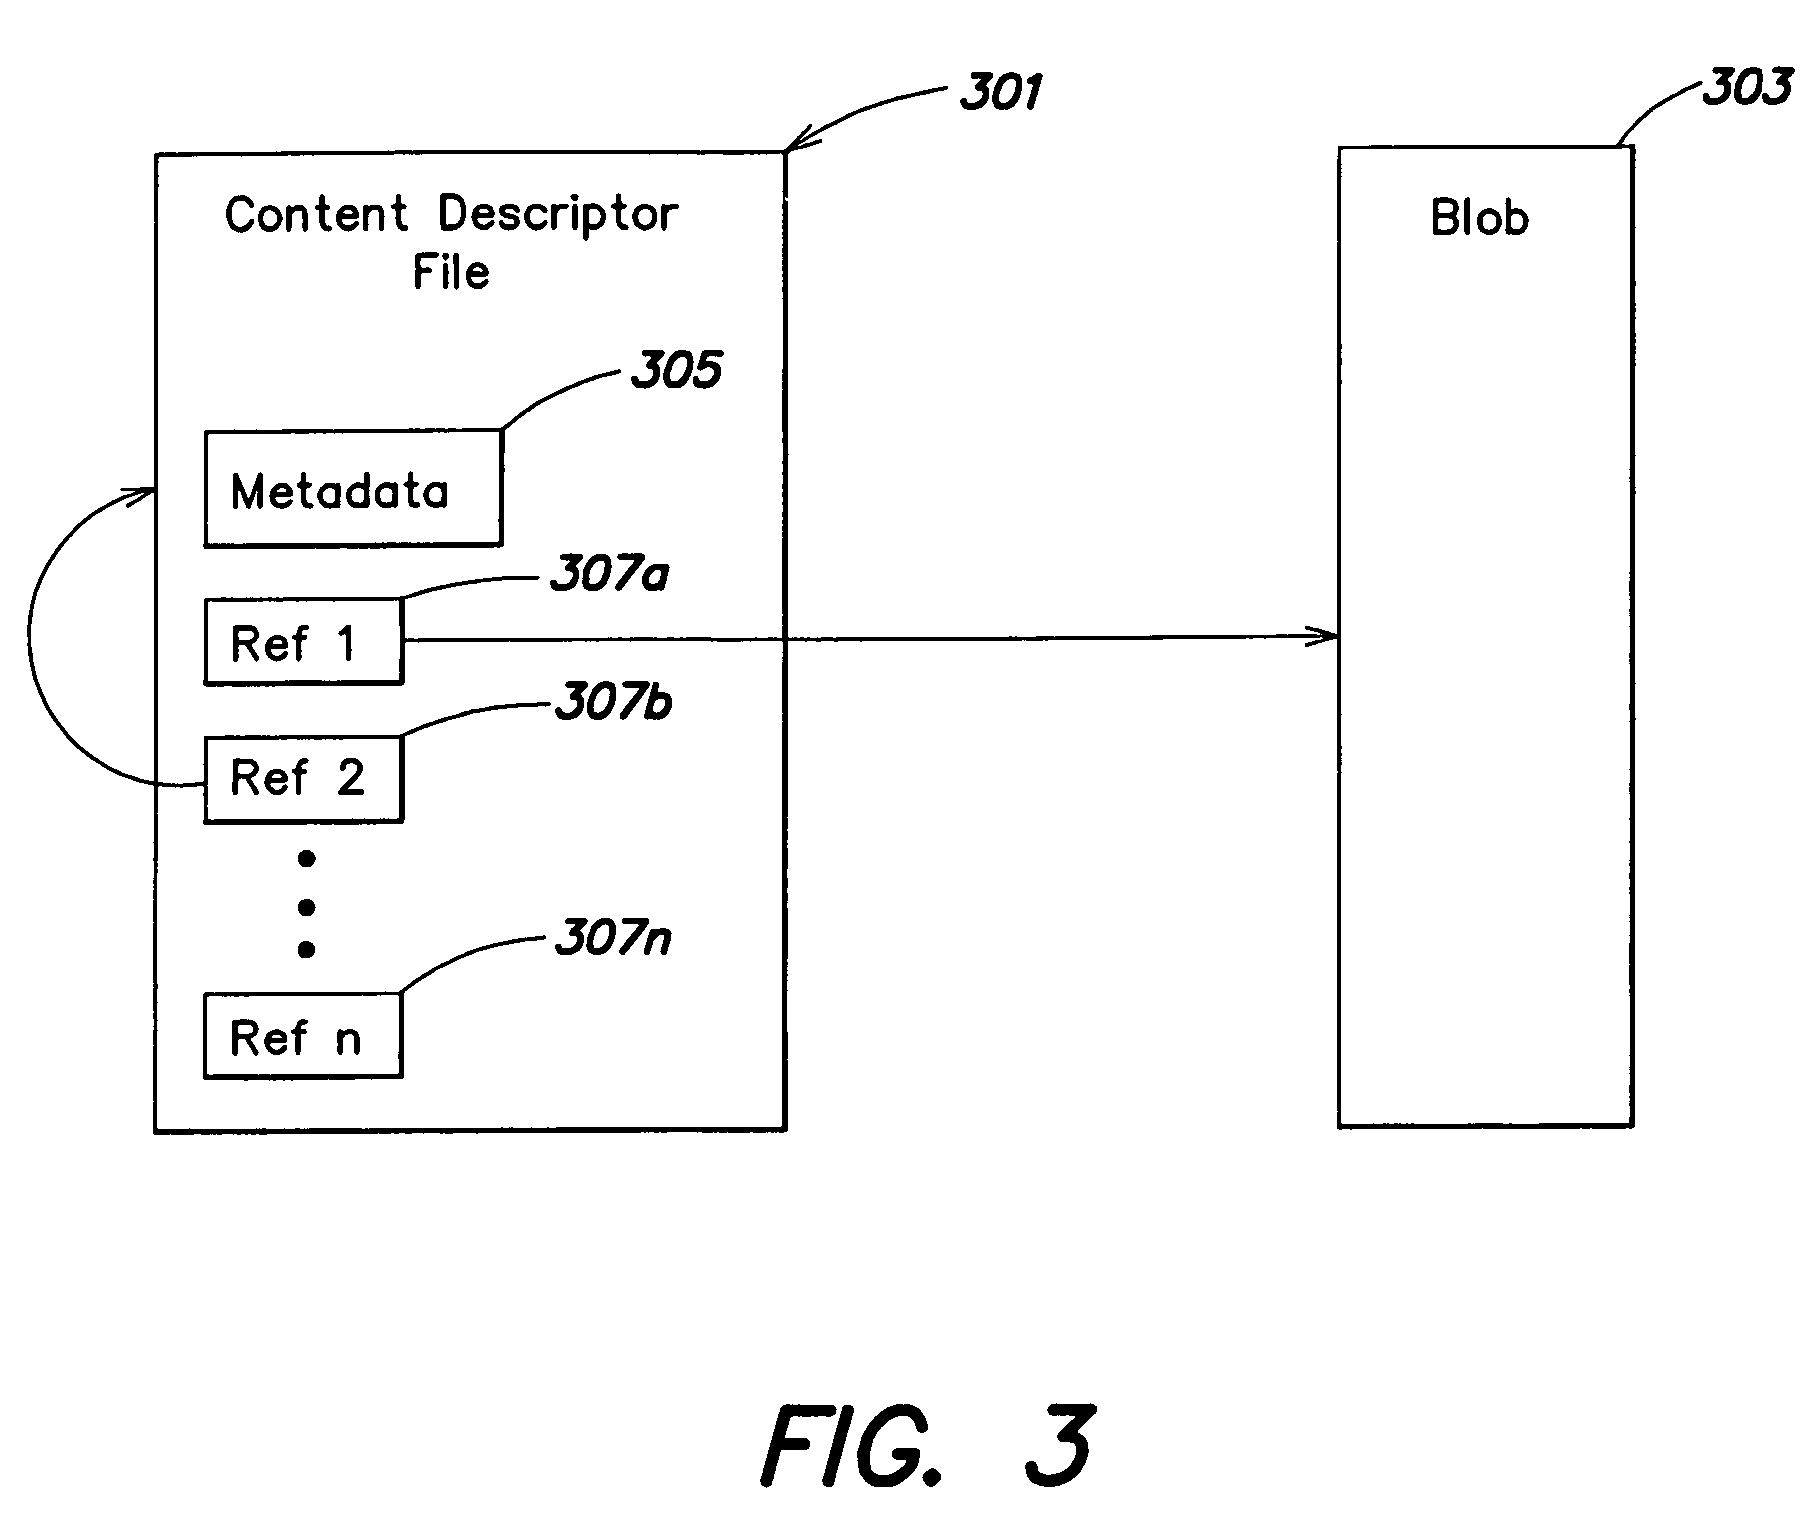 Methods and apparatus for secure modification of a retention period for data in a storage system